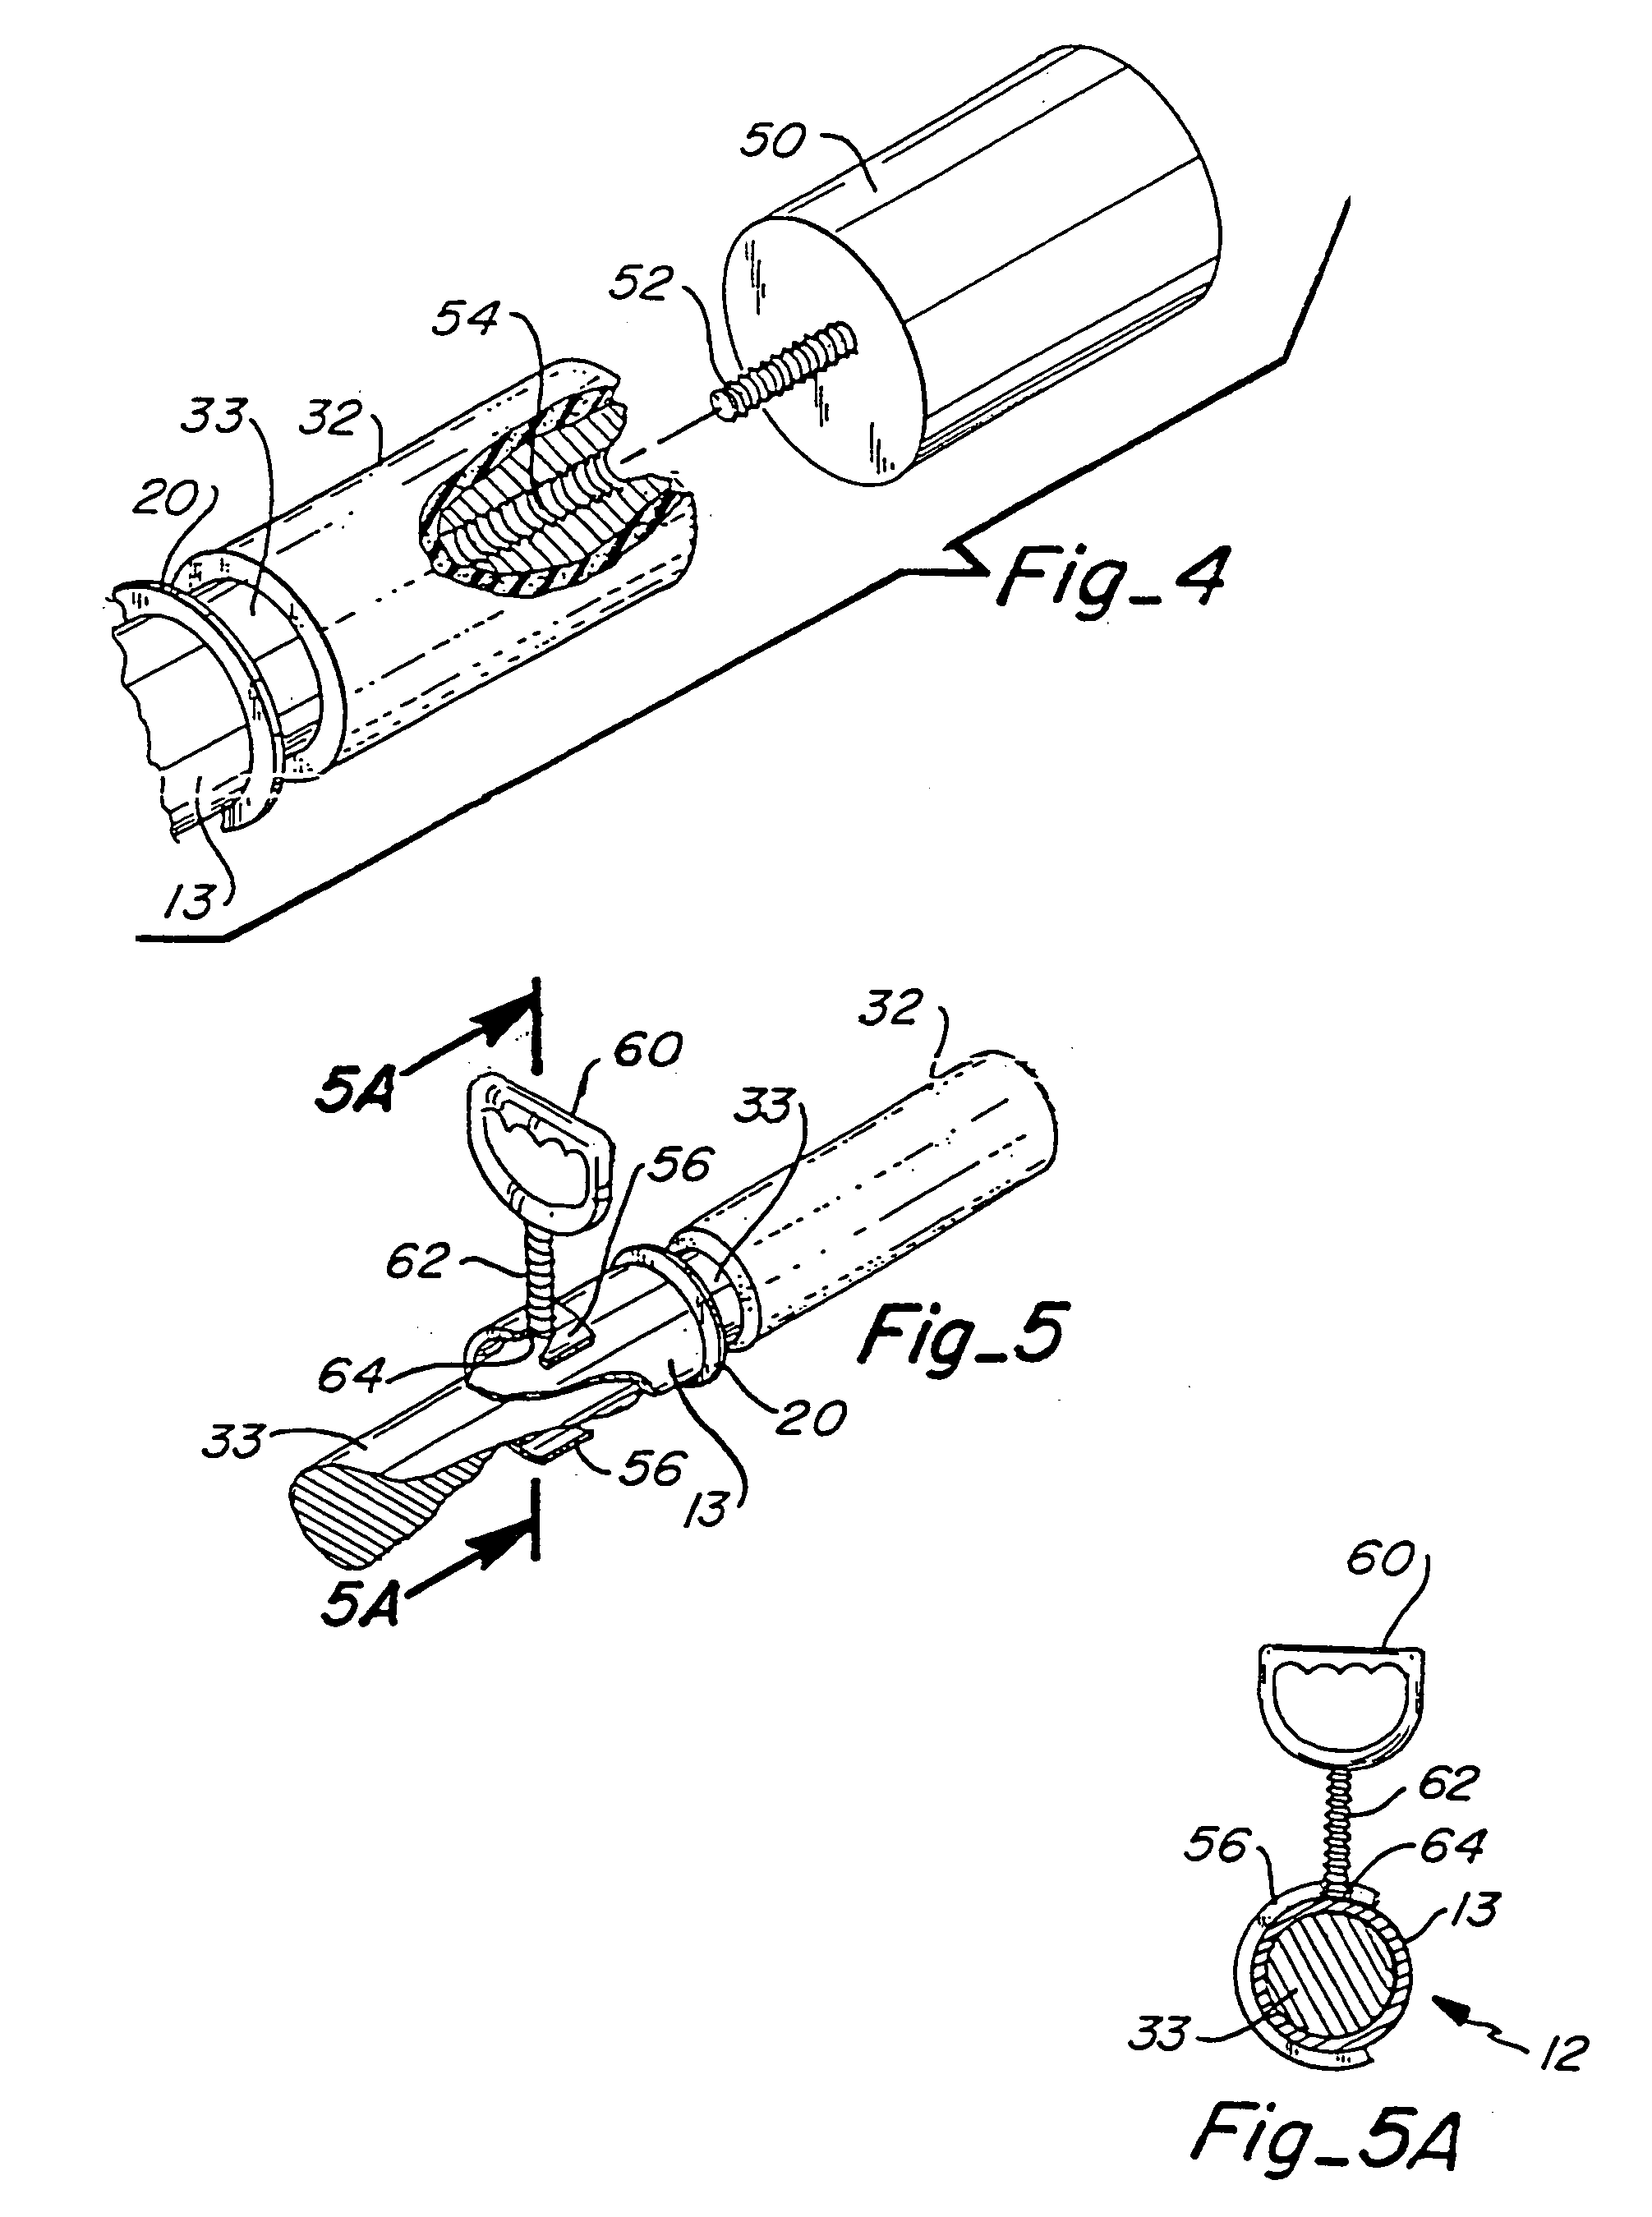 Device and method for transferring force to a targeted objected